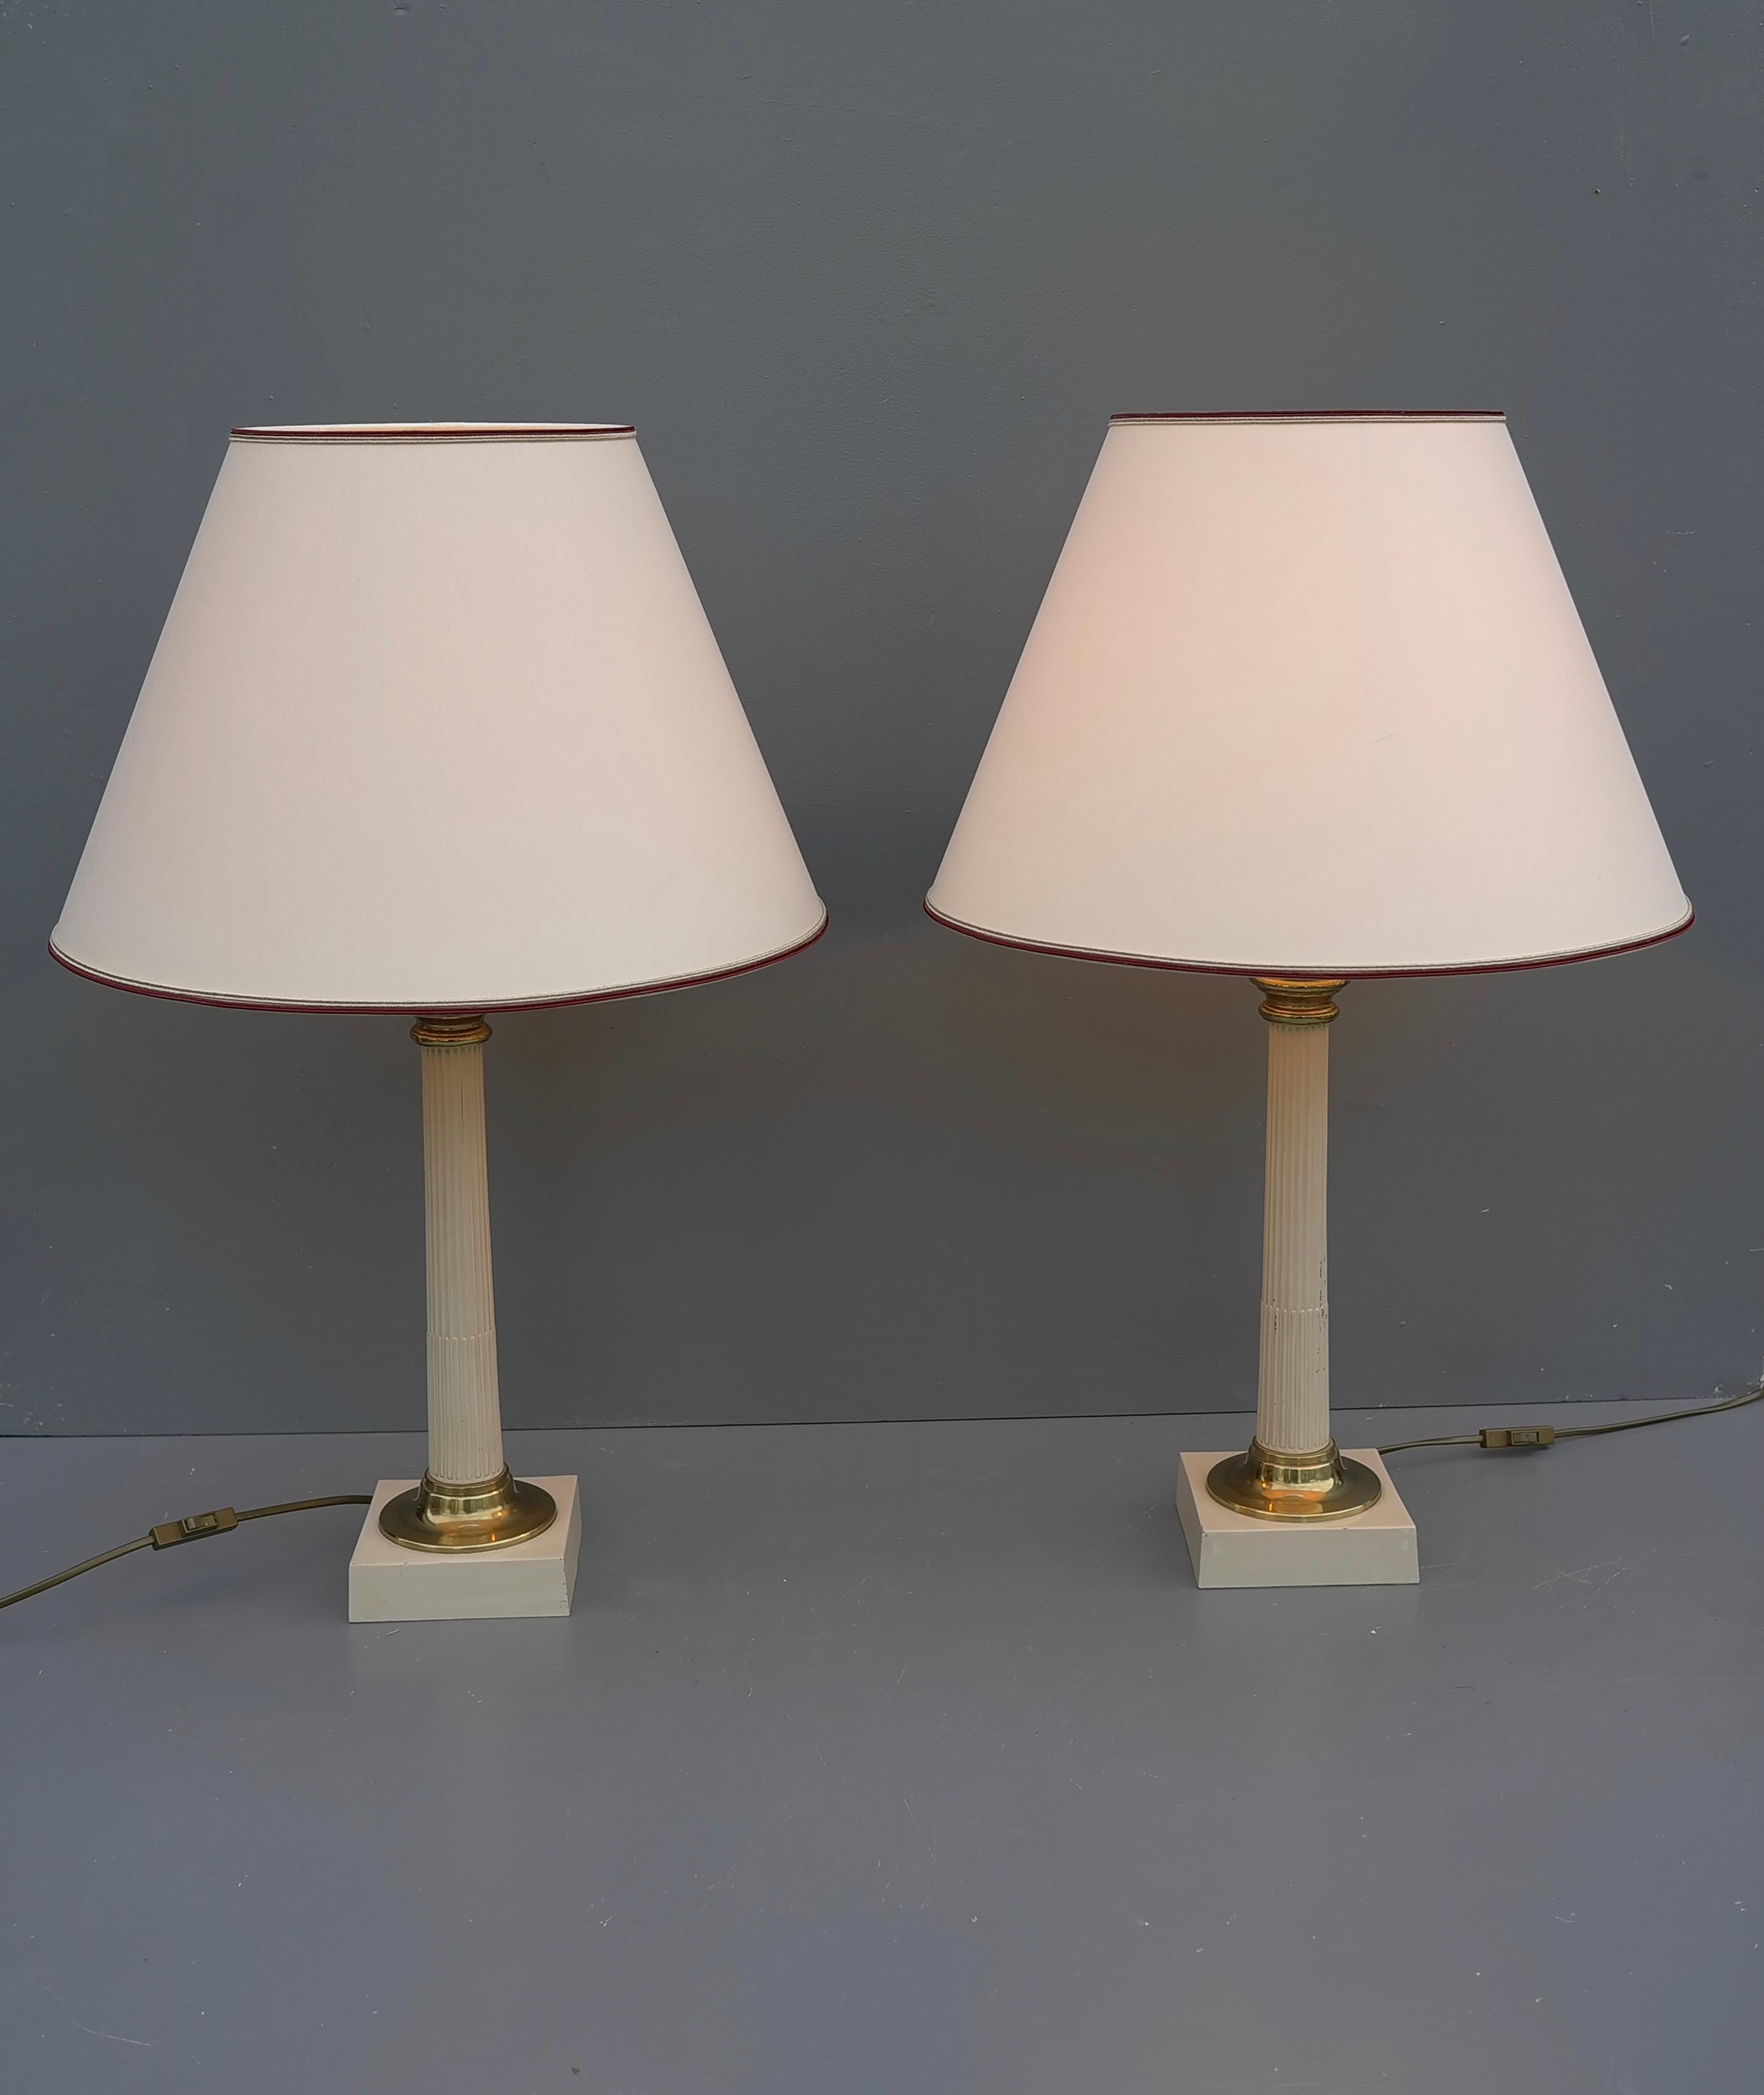 Pair of Column Table Lamps in Off White Metal and Brass Details, France 1960's For Sale 2